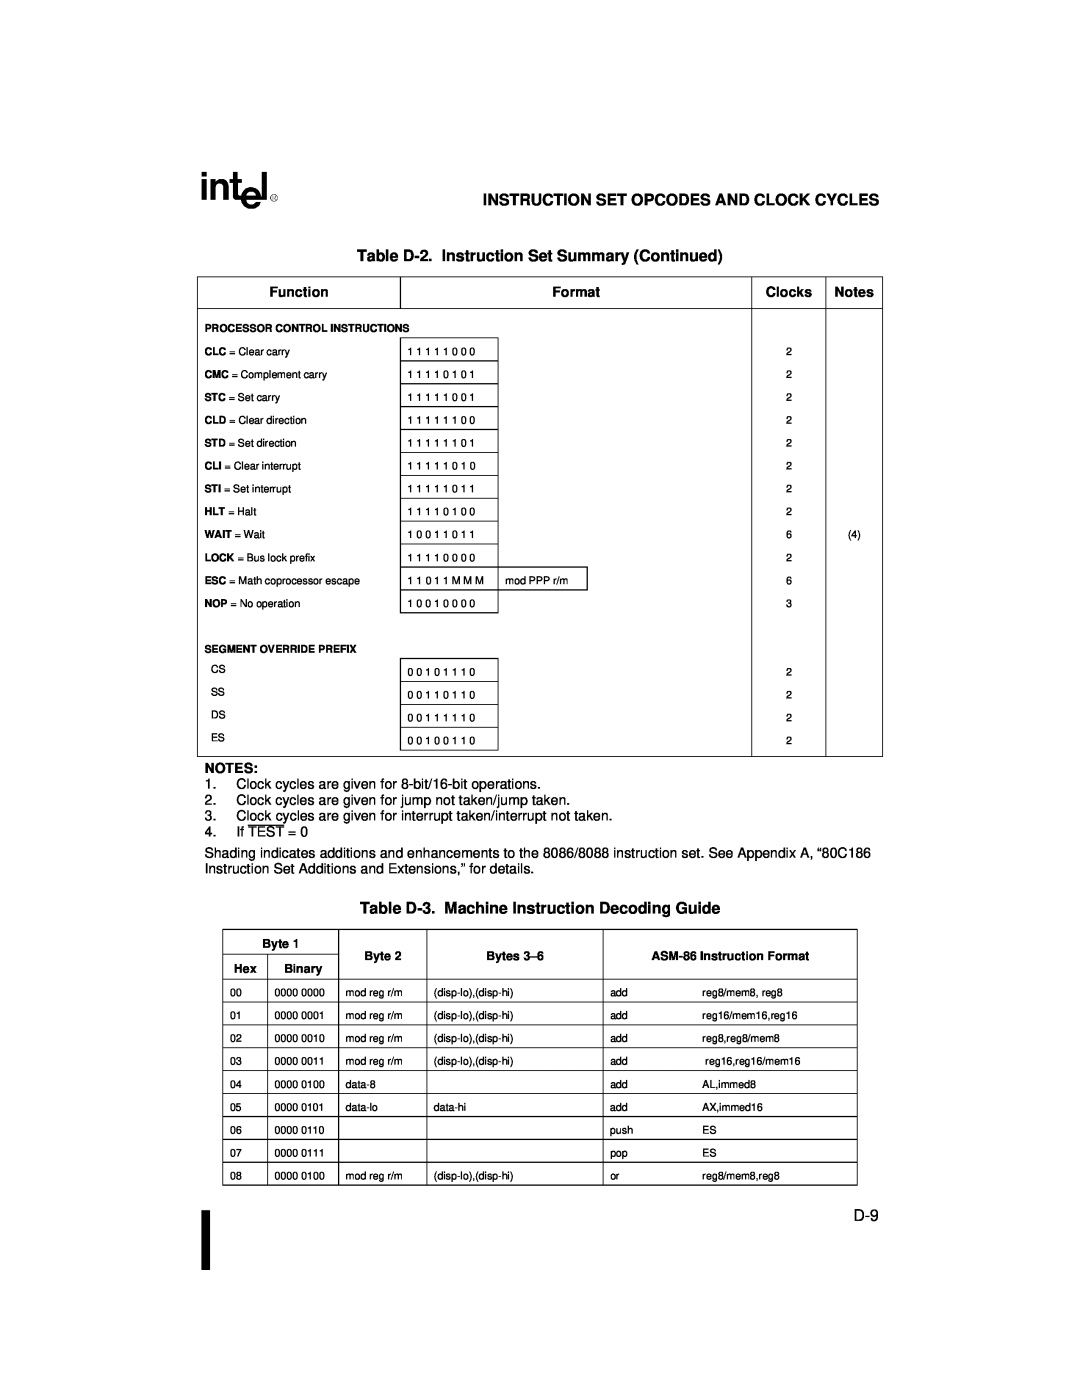 Intel 80C188XL Instruction Set Opcodes And Clock Cycles, Table D-2.Instruction Set Summary Continued, Bytes 3–6 